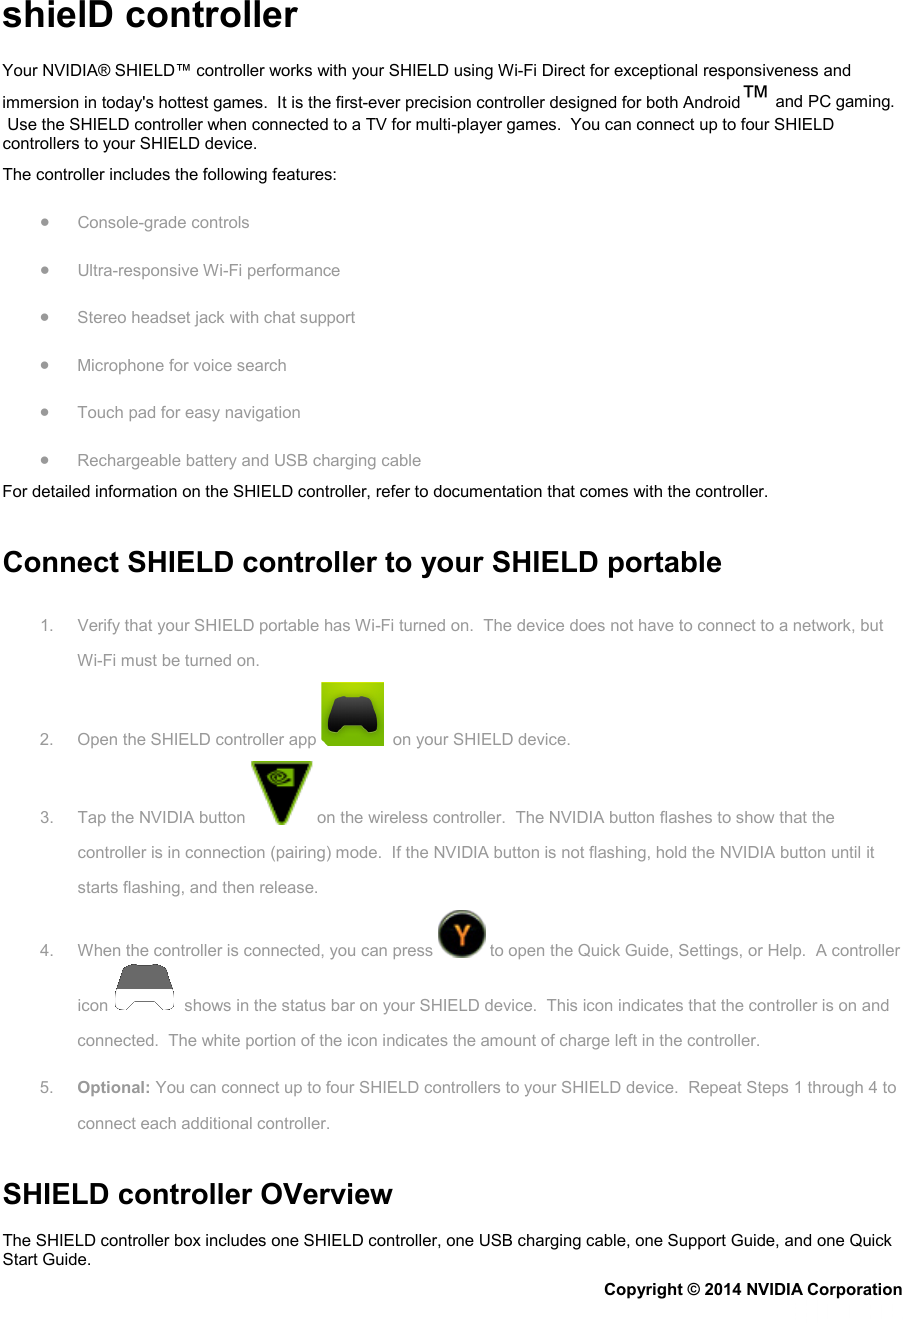   shielD controller Your NVIDIA® SHIELD™ controller works with your SHIELD using Wi-Fi Direct for exceptional responsiveness and immersion in today&apos;s hottest games.  It is the first-ever precision controller designed for both Android™ and PC gaming.  Use the SHIELD controller when connected to a TV for multi-player games.  You can connect up to four SHIELD controllers to your SHIELD device. The controller includes the following features: • Console-grade controls • Ultra-responsive Wi-Fi performance • Stereo headset jack with chat support • Microphone for voice search • Touch pad for easy navigation • Rechargeable battery and USB charging cable For detailed information on the SHIELD controller, refer to documentation that comes with the controller.   Connect SHIELD controller to your SHIELD portable 1. Verify that your SHIELD portable has Wi-Fi turned on.  The device does not have to connect to a network, but Wi-Fi must be turned on. 2. Open the SHIELD controller app    on your SHIELD device. 3. Tap the NVIDIA button   on the wireless controller.  The NVIDIA button flashes to show that the controller is in connection (pairing) mode.  If the NVIDIA button is not flashing, hold the NVIDIA button until it starts flashing, and then release. 4. When the controller is connected, you can press   to open the Quick Guide, Settings, or Help.  A controller icon    shows in the status bar on your SHIELD device.  This icon indicates that the controller is on and connected.  The white portion of the icon indicates the amount of charge left in the controller. 5. Optional: You can connect up to four SHIELD controllers to your SHIELD device.  Repeat Steps 1 through 4 to connect each additional controller.   SHIELD controller OVerview The SHIELD controller box includes one SHIELD controller, one USB charging cable, one Support Guide, and one Quick Start Guide. Copyright © 2014 NVIDIA Corporation   